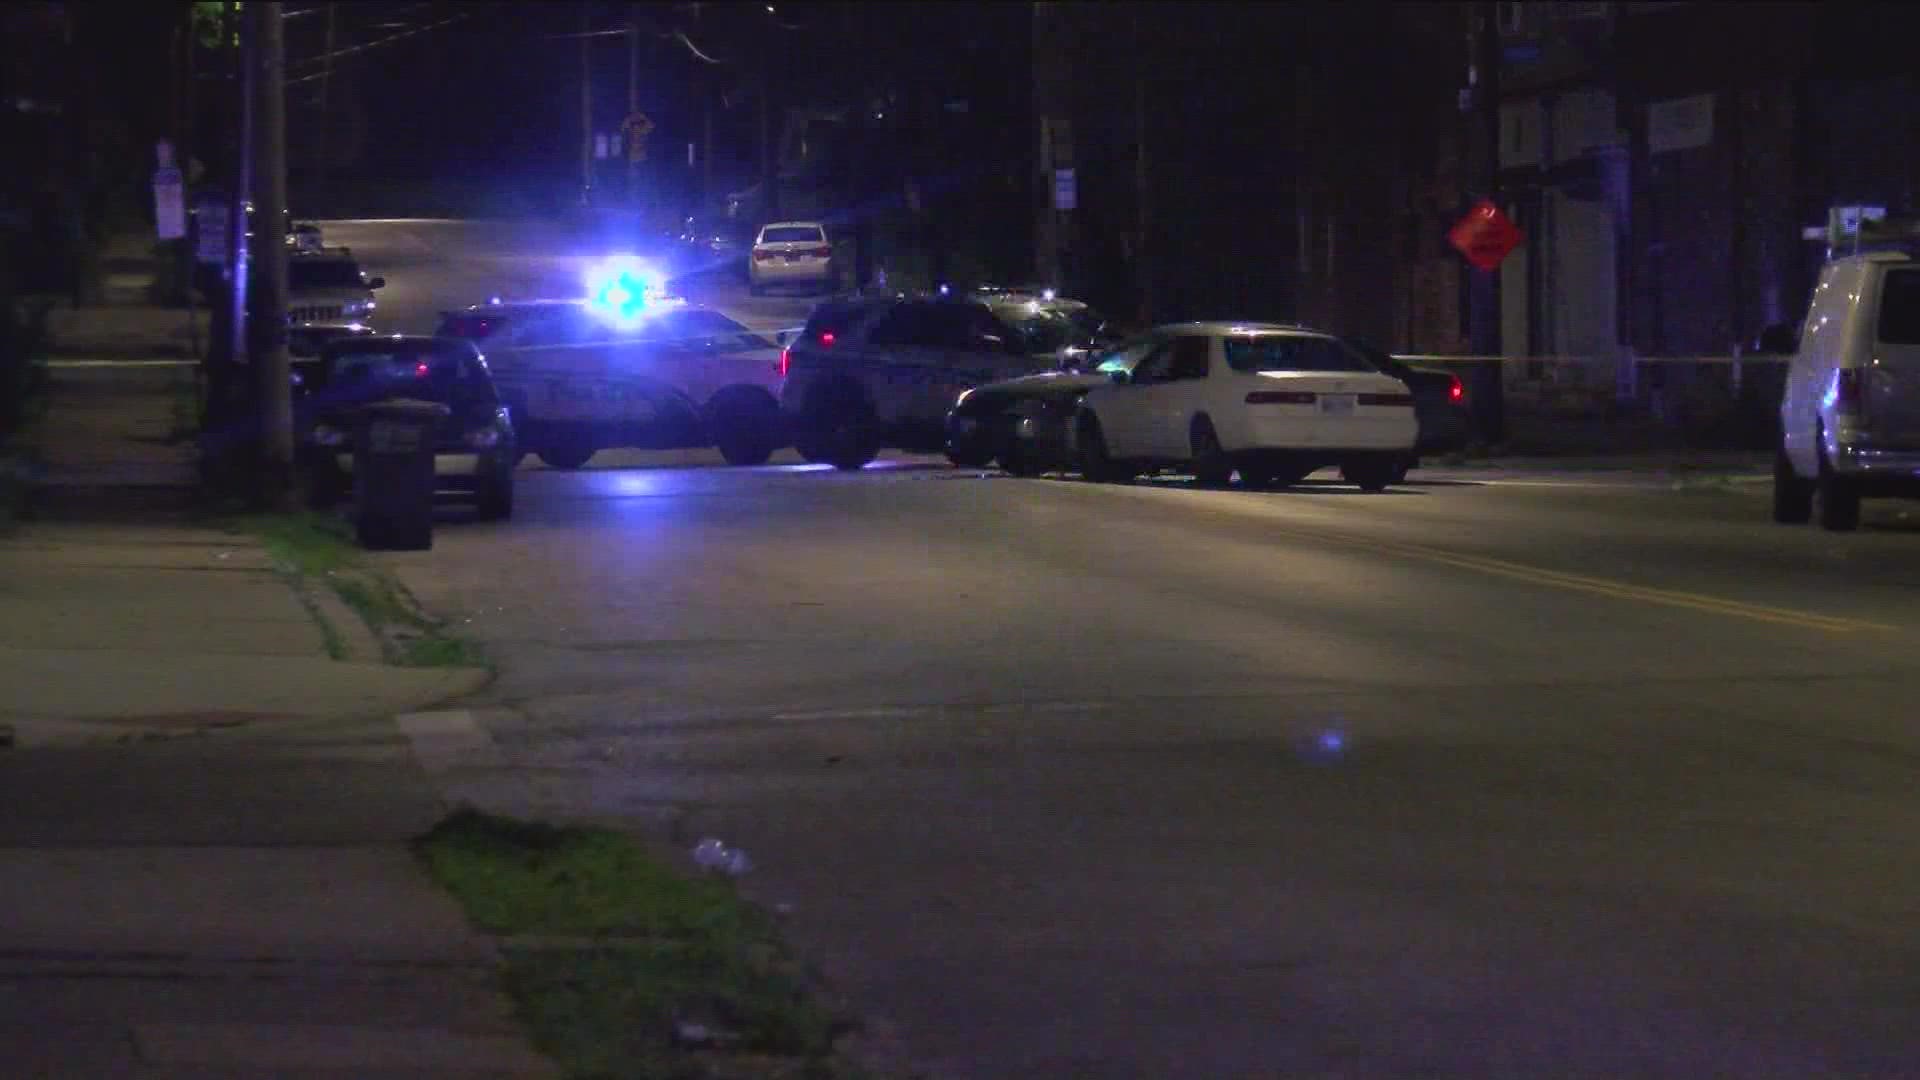 Police say the male victim was shot around 11:30 p.m. on Friday near Western Ave. and Gibbons St.